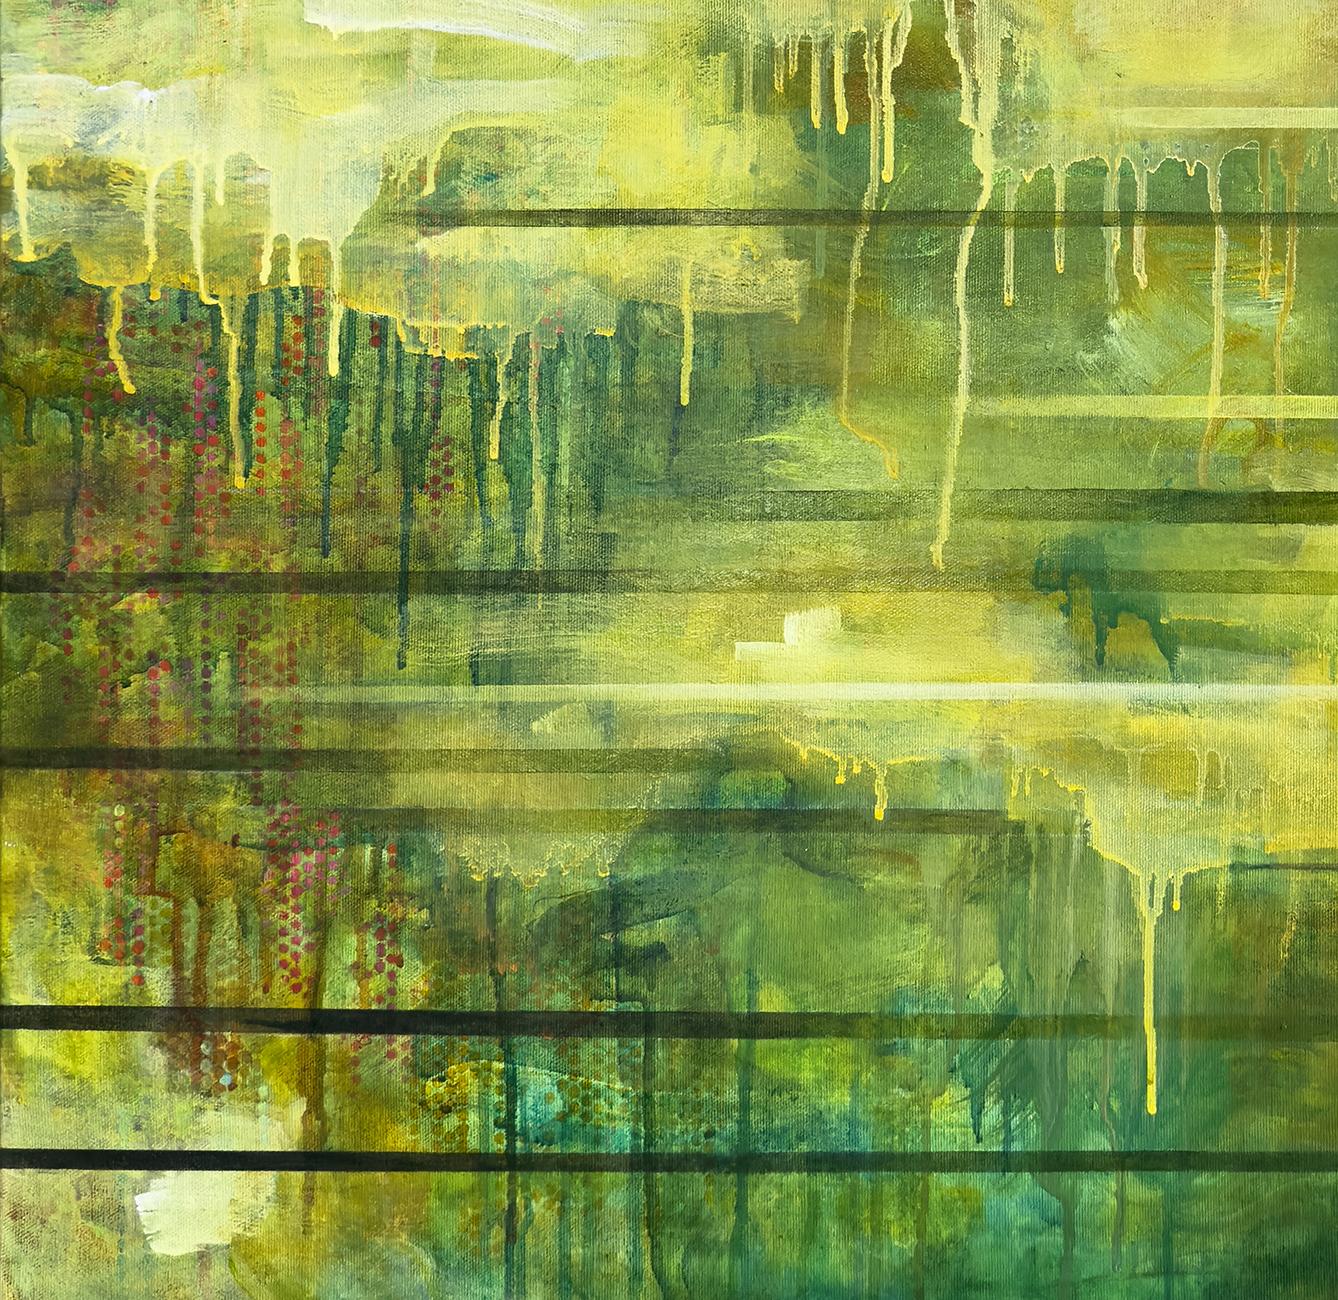 Sandra Cohen’s “until” is a 30 x 30 x 1 inch abstract painting on canvas, loosely painted in verdant green and yellow tones, with dotted patterns of red, pink, and orange revealed in places. This is a landscape of time, where lighter colors at the